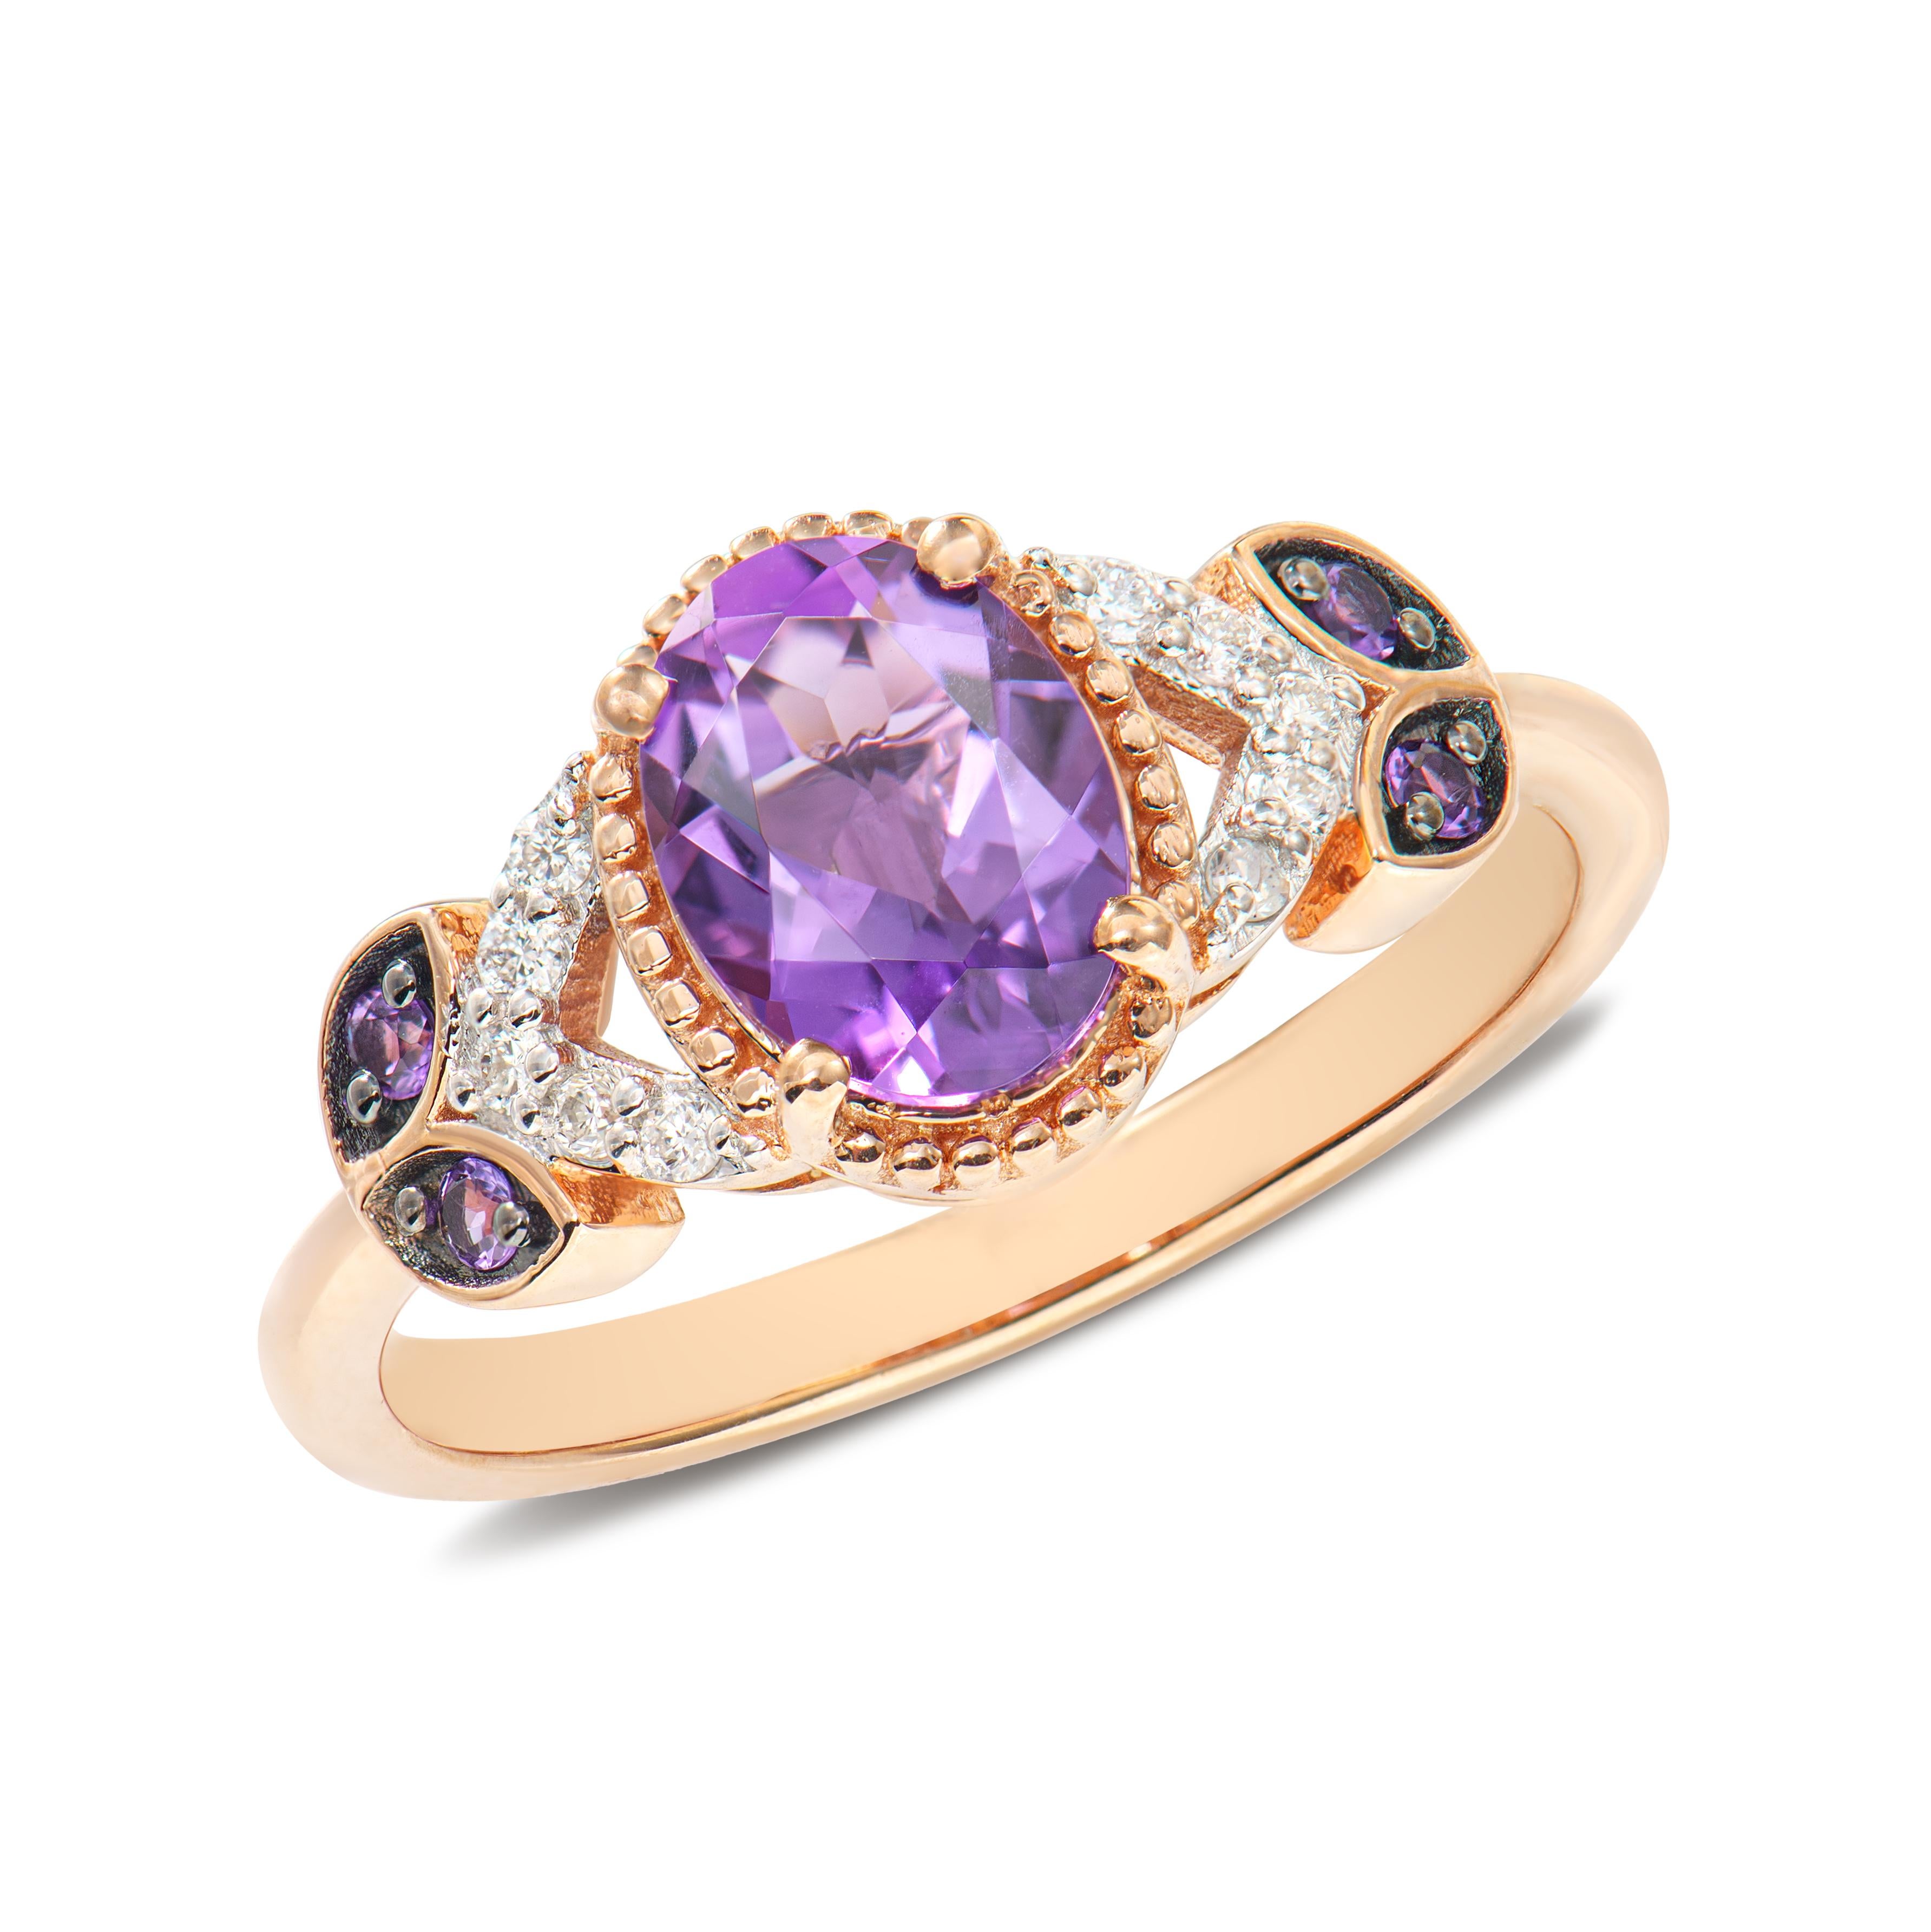 Presented A lovely set of Amethyst for people who value quality and want to wear it to any occasion or celebration. The Rose gold Amethyst Fancy Ring, adorned with diamonds offer a classic yet elegant appearance.
  
Amethyst Fancy Ring in 14Karat